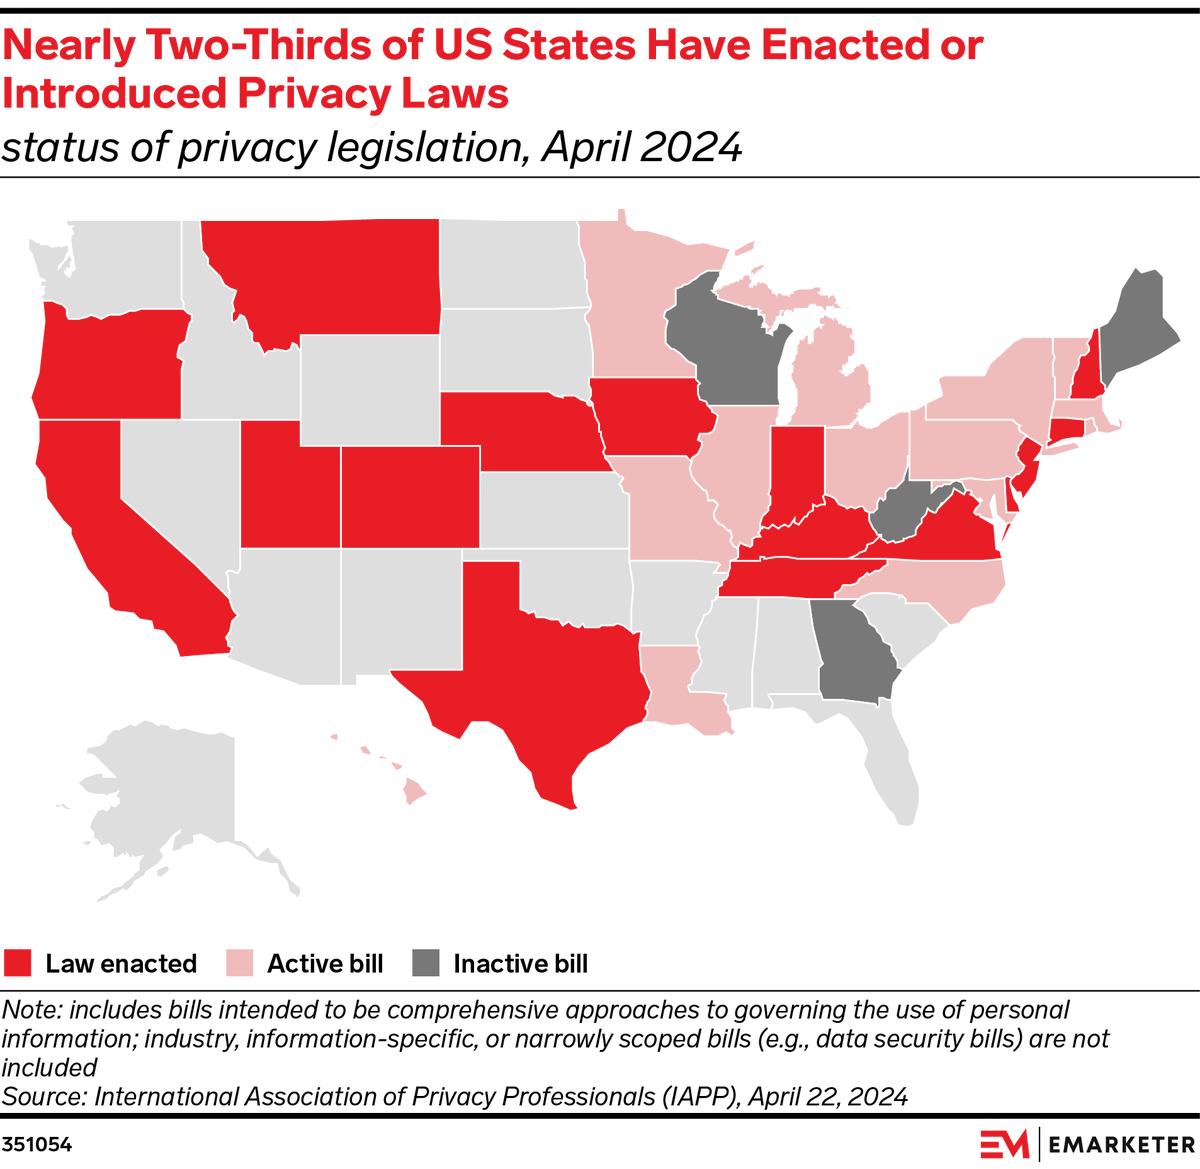 Nearly two thirds of US states have enacted or introduced privacy laws: trib.al/ky9AoqW #newsletter #chartoftheday #privacy #privacylaw